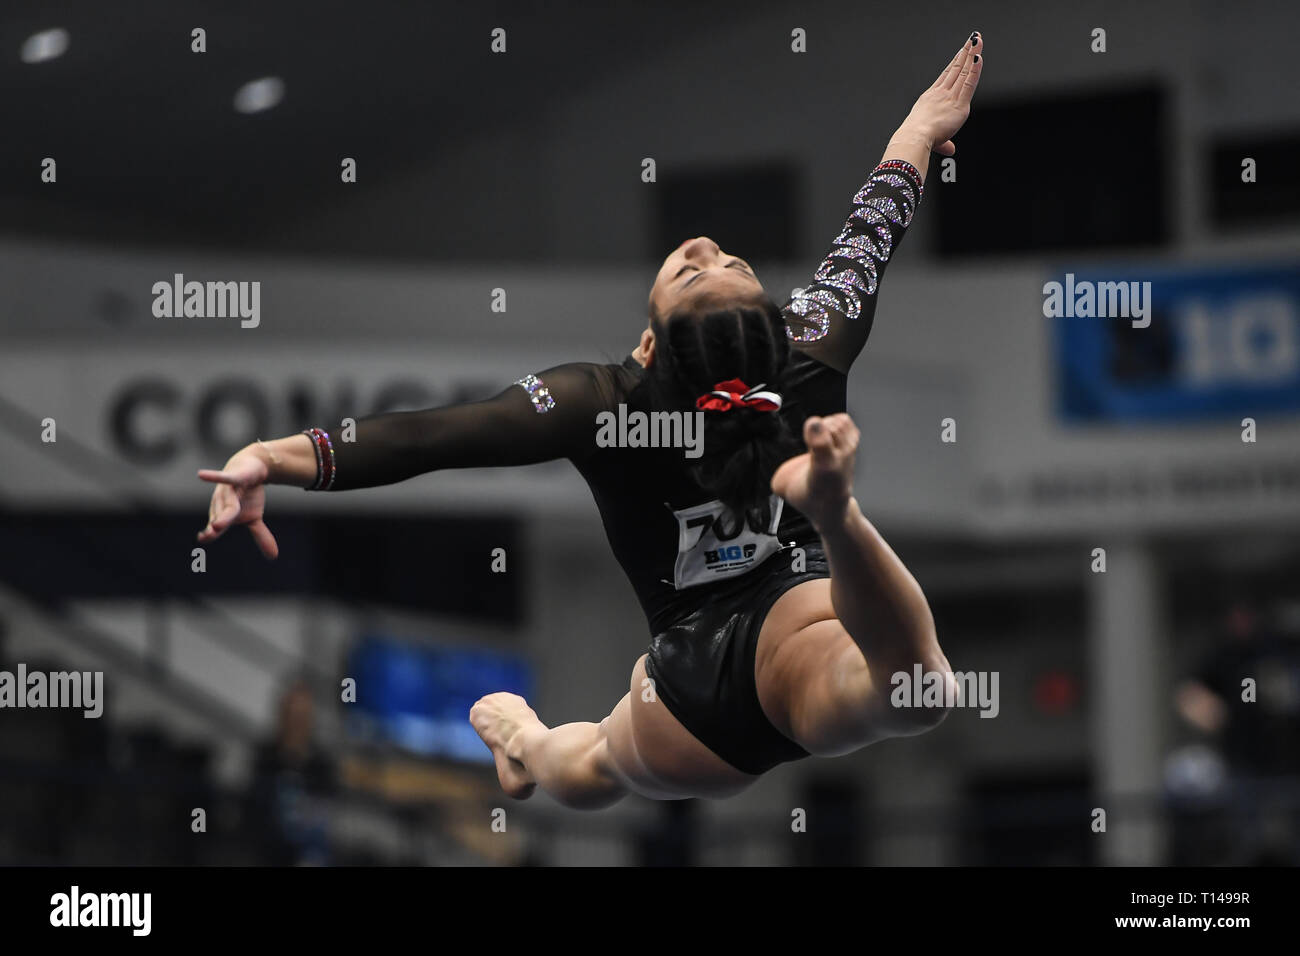 University Park, Pennsylvania, USA. 23rd Mar, 2019. DANICA ABANTO from the Ohio State competes on the floor exercise at Rec Hall in University Park, Pennsylvania. Credit: Amy Sanderson/ZUMA Wire/Alamy Live News Stock Photo